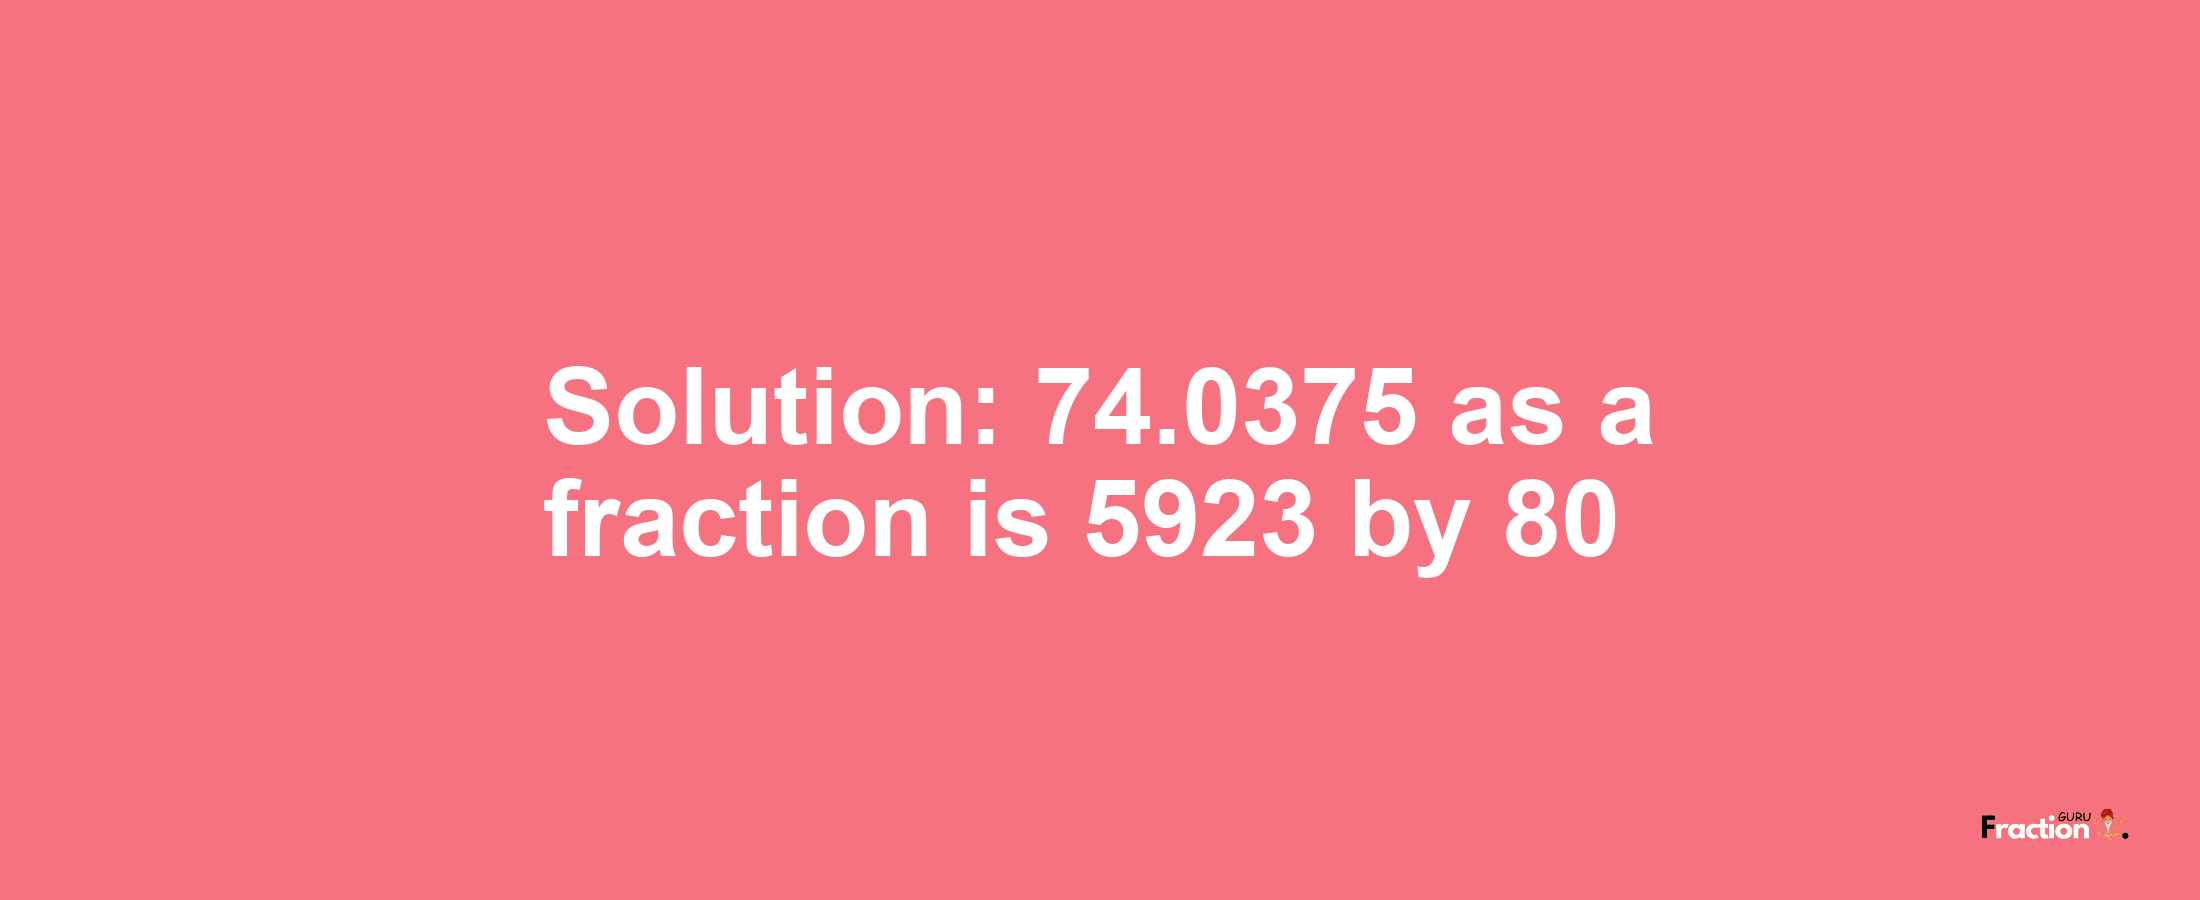 Solution:74.0375 as a fraction is 5923/80